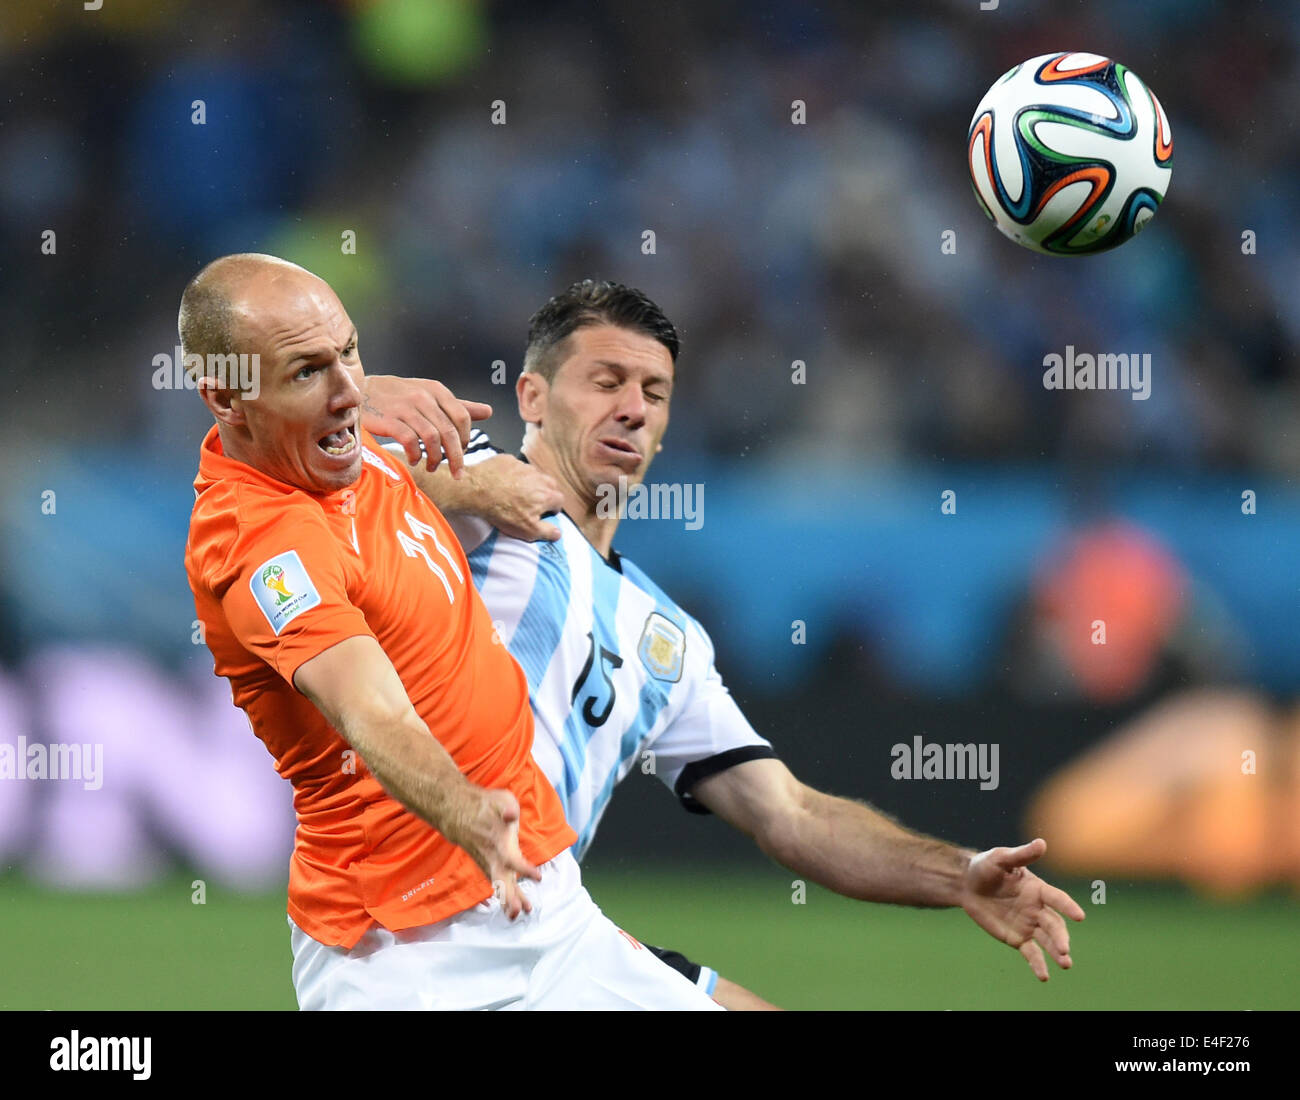 Sao Paulo, Brazil. 09th July, 2014. Martin Demichelis (R) of Argentina and Arjen Robben of the Netherlands vie for the ball during the FIFA World Cup 2014 semi-final soccer match between the Netherlands and Argentina at the Arena Corinthians in Sao Paulo, Brazil, 09 July 2014. Photo: Marius Becker/dpa/Alamy Live News Stock Photo